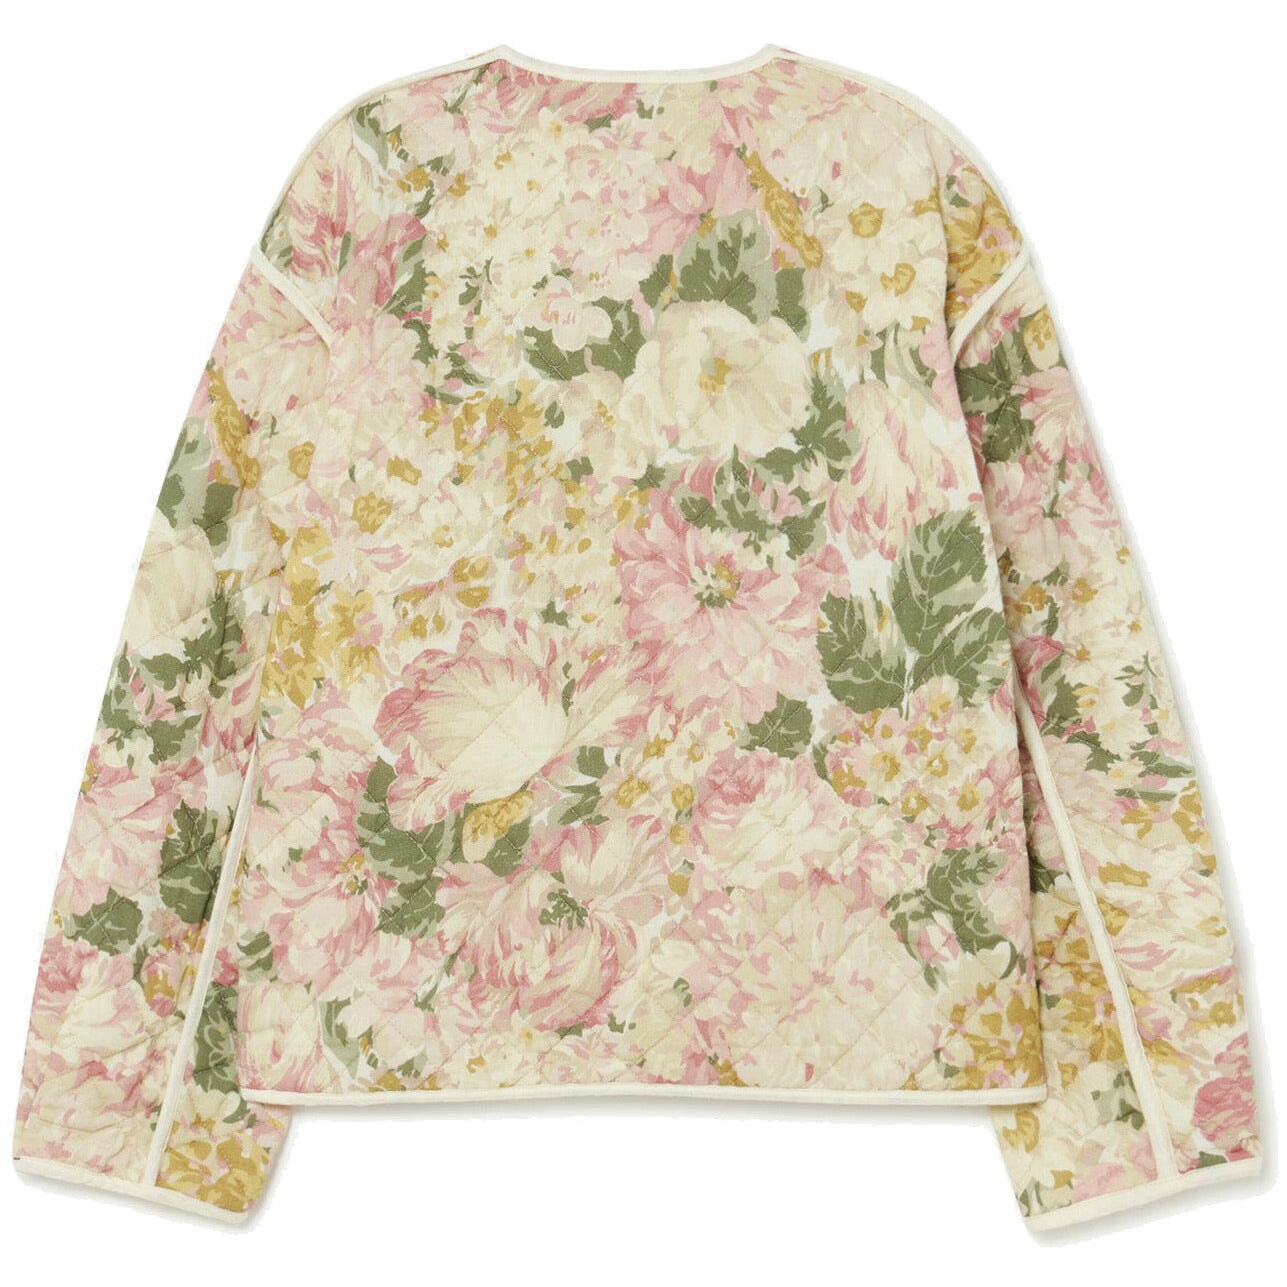 Flowers White Starling Jacket